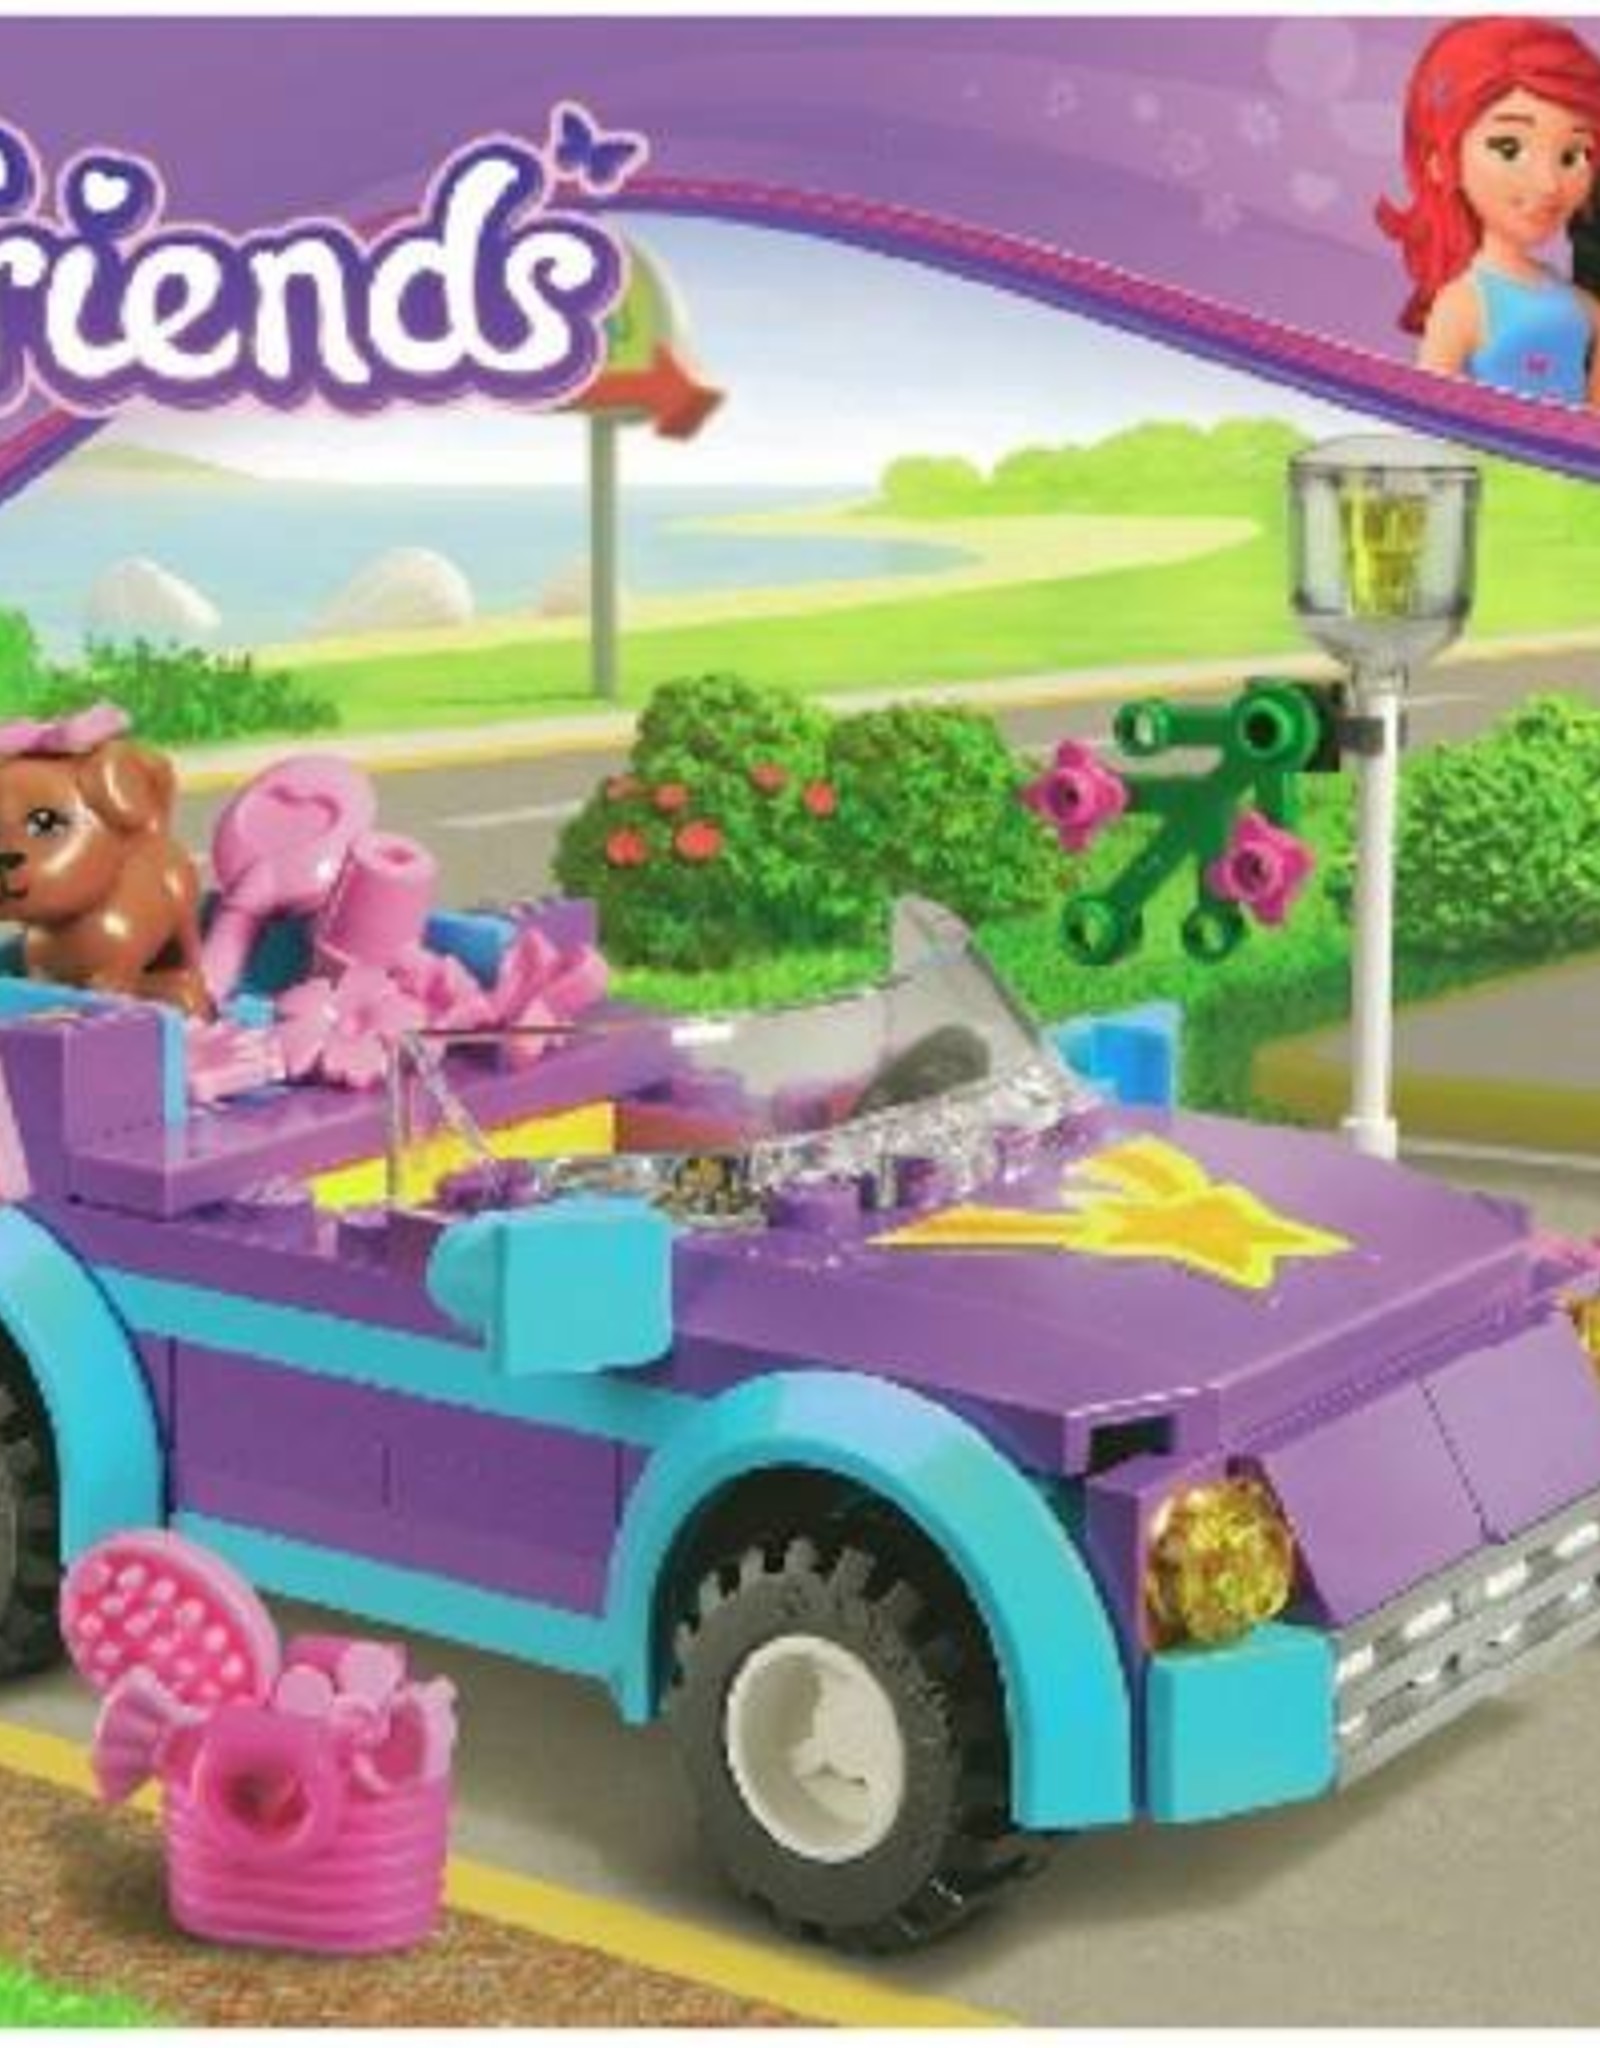 LEGO LEGO 3183 Stephanies coole cabriolet FRIENDS